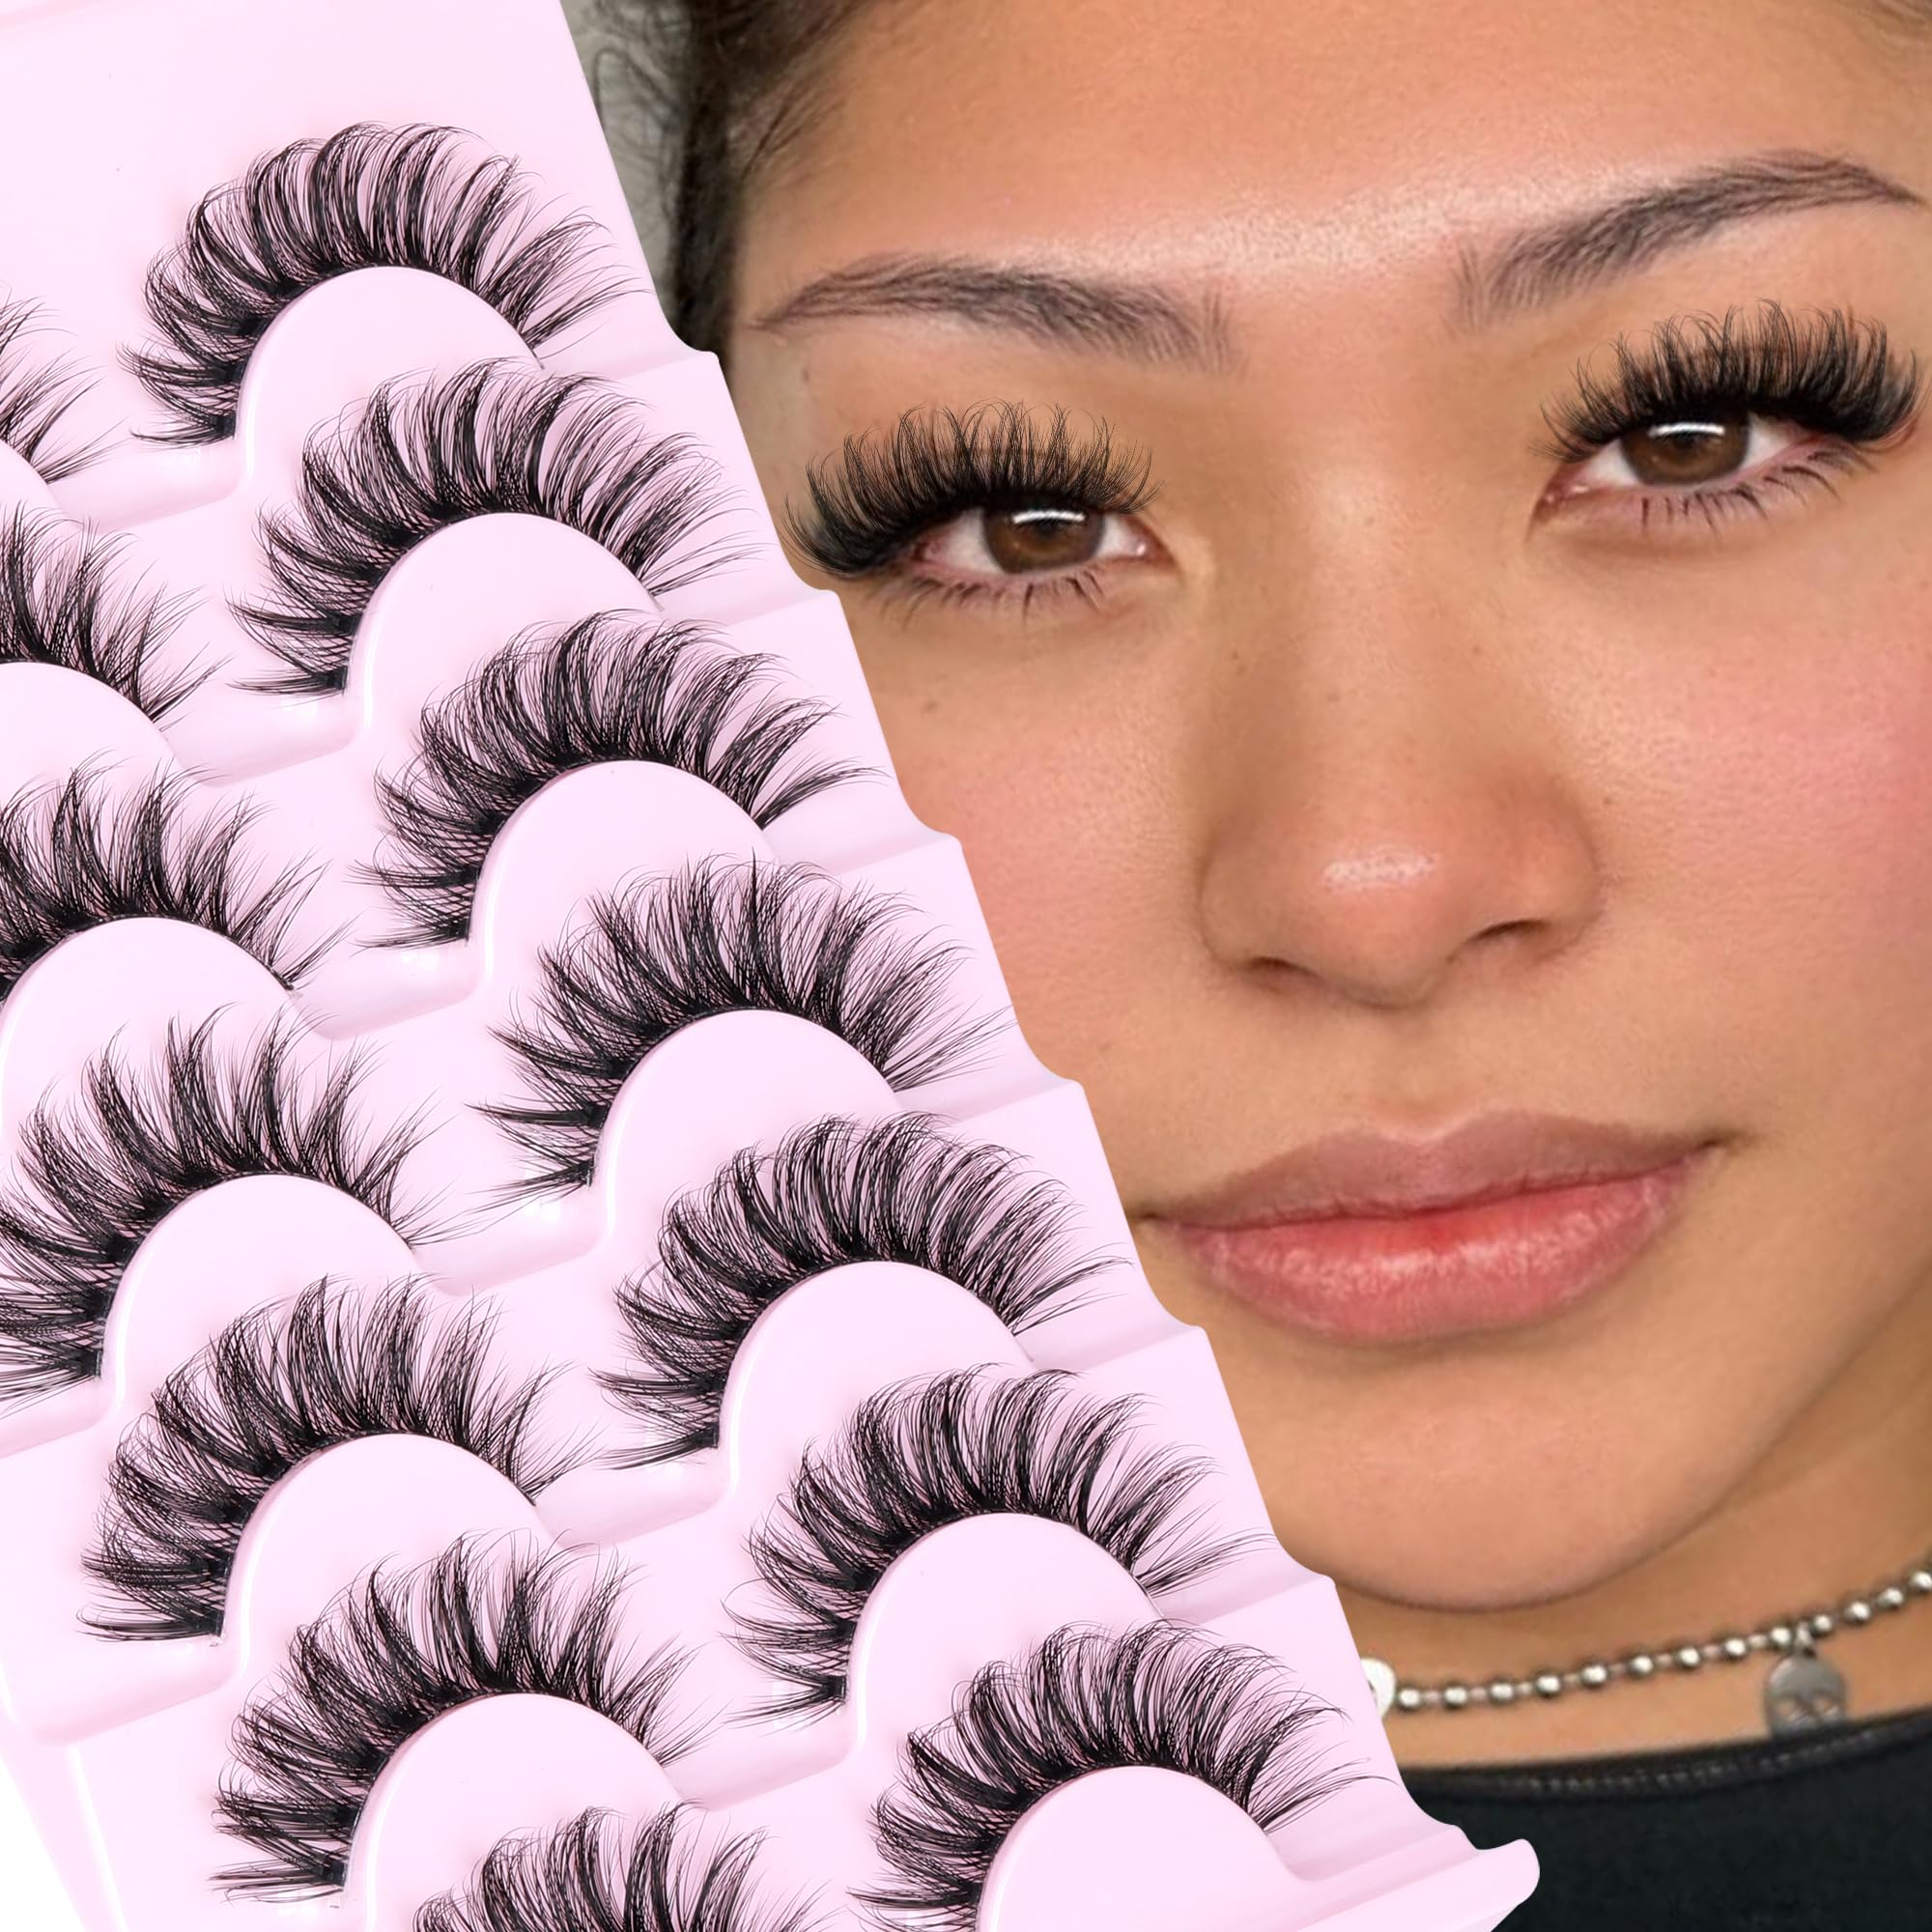 JIMIRE Natural False Eyelashes with Clear Band Mink Fluffy Lashes D Curl Strip Lashes 16MM Volume Natural Look like Lash Extension 5D Cat Eye Lashes 7 Pairs Pack